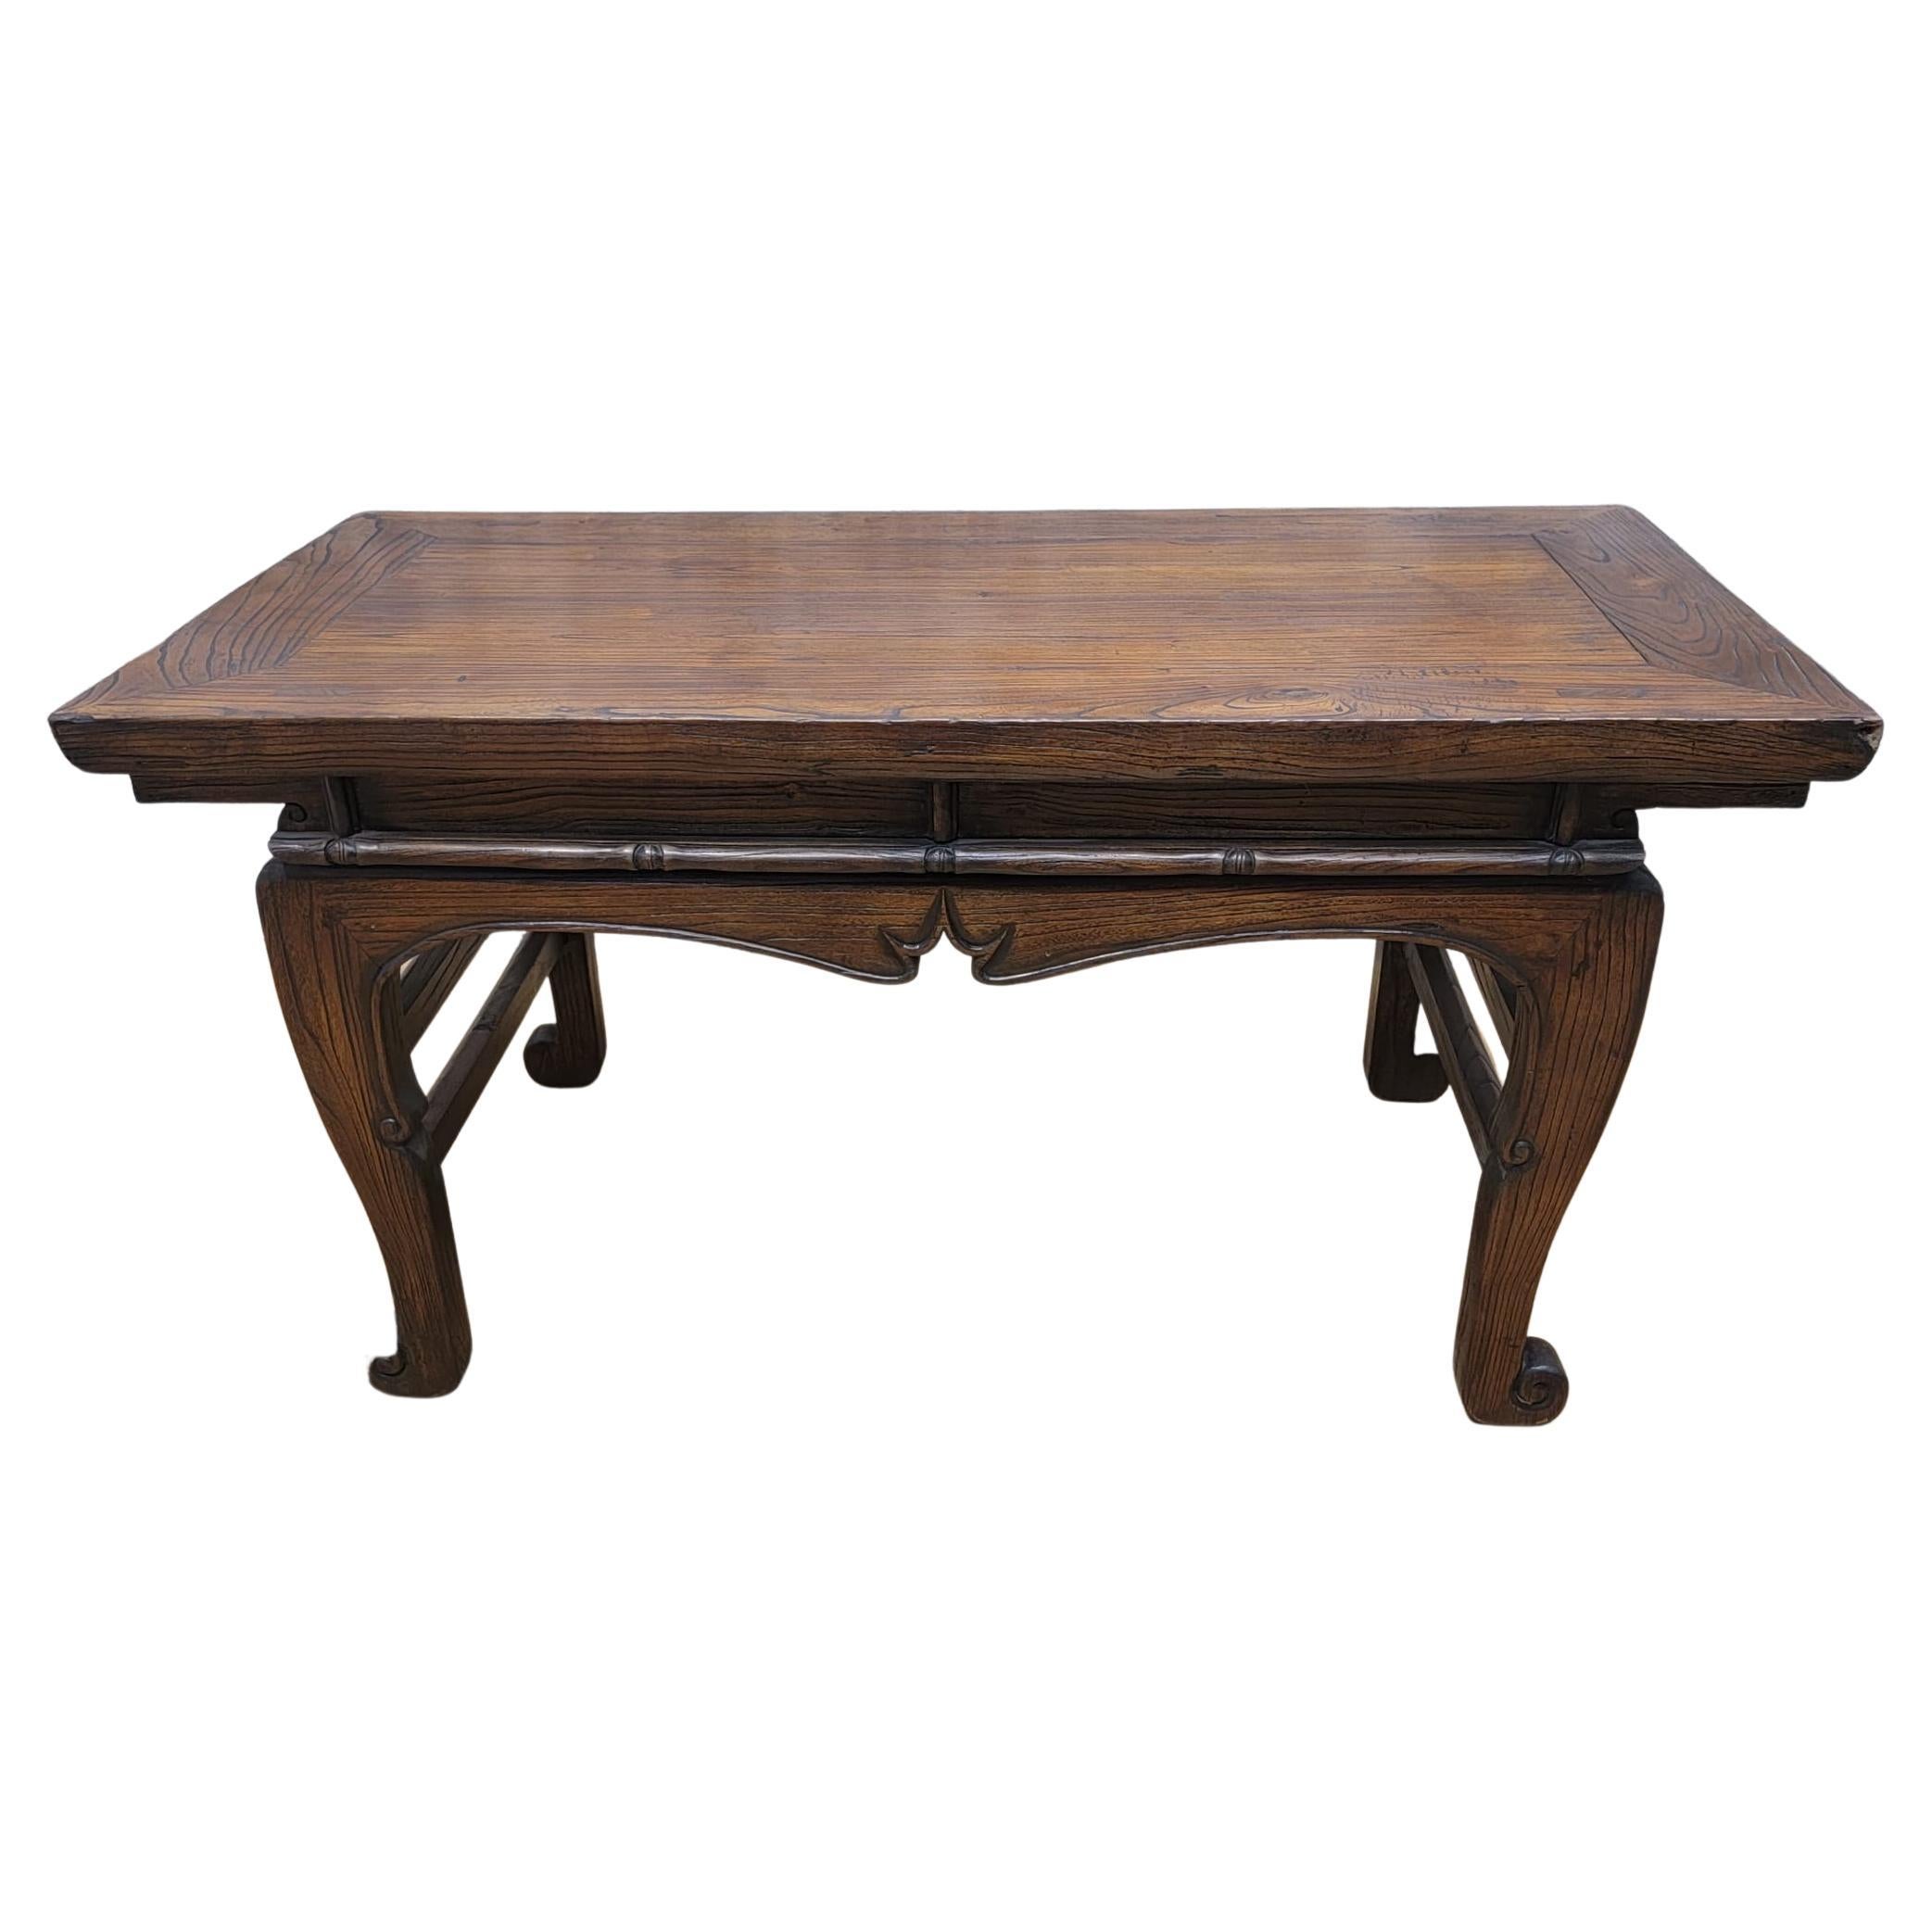 Antique Chinese Elm Coffee Table with Original Color and Patina